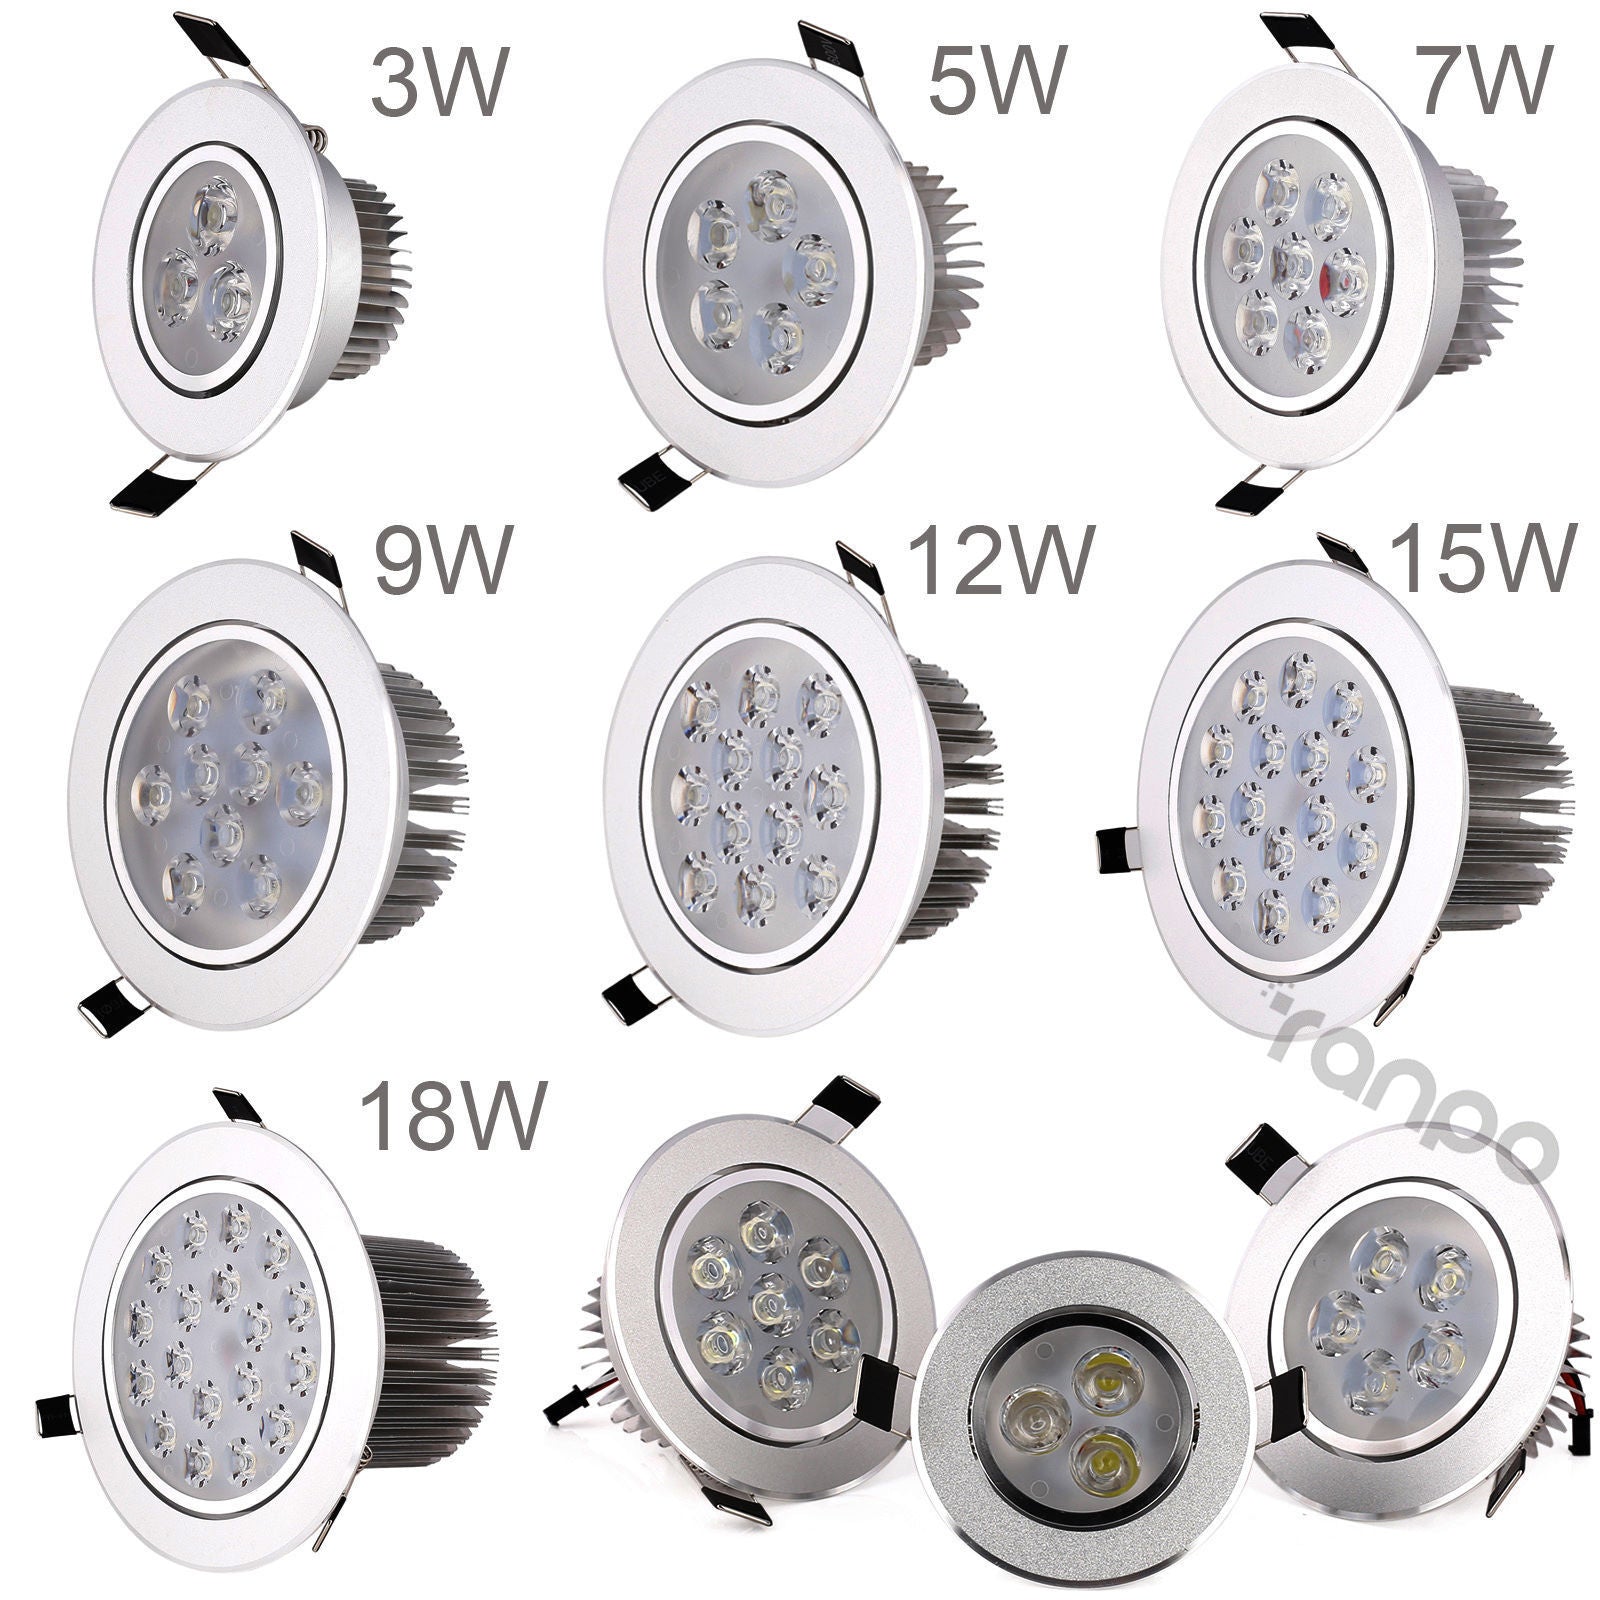 LED Recessed Ceiling Down Light White Lamp AC 220V 110V 3W 5W 7W 9W 12W 15W 18W Downlight Spotlight for Home Living Room Hotel